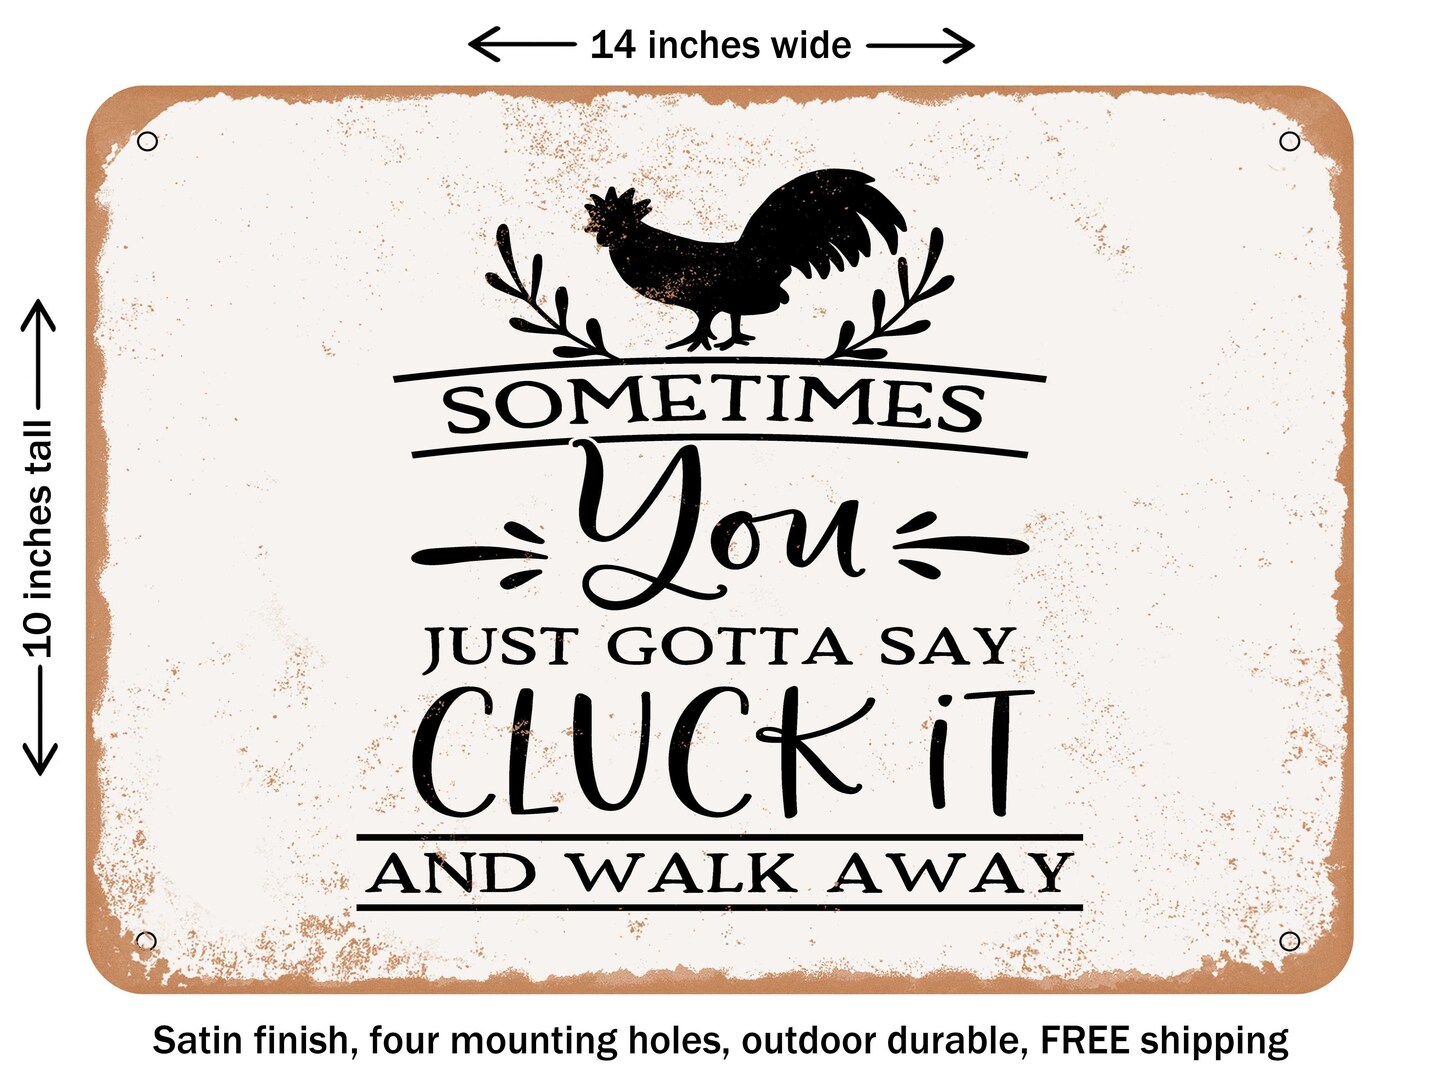 DECORATIVE METAL SIGN - Sometimes You Just Gotta Say Cluck It and Walk Away - Vintage Rusty Look